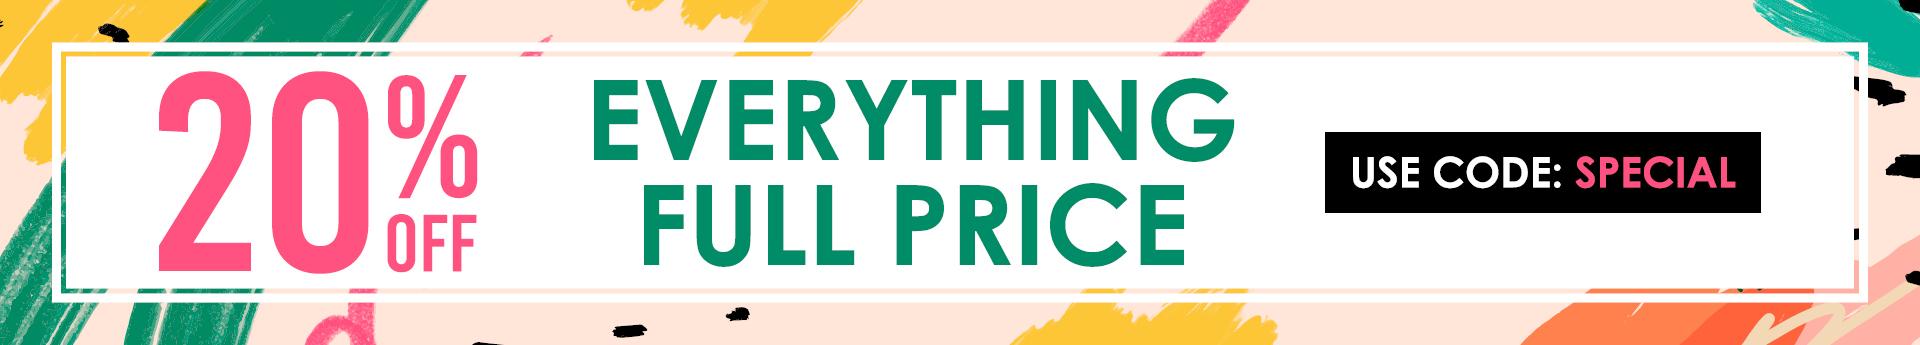 Extra 20% OFF on everything full price